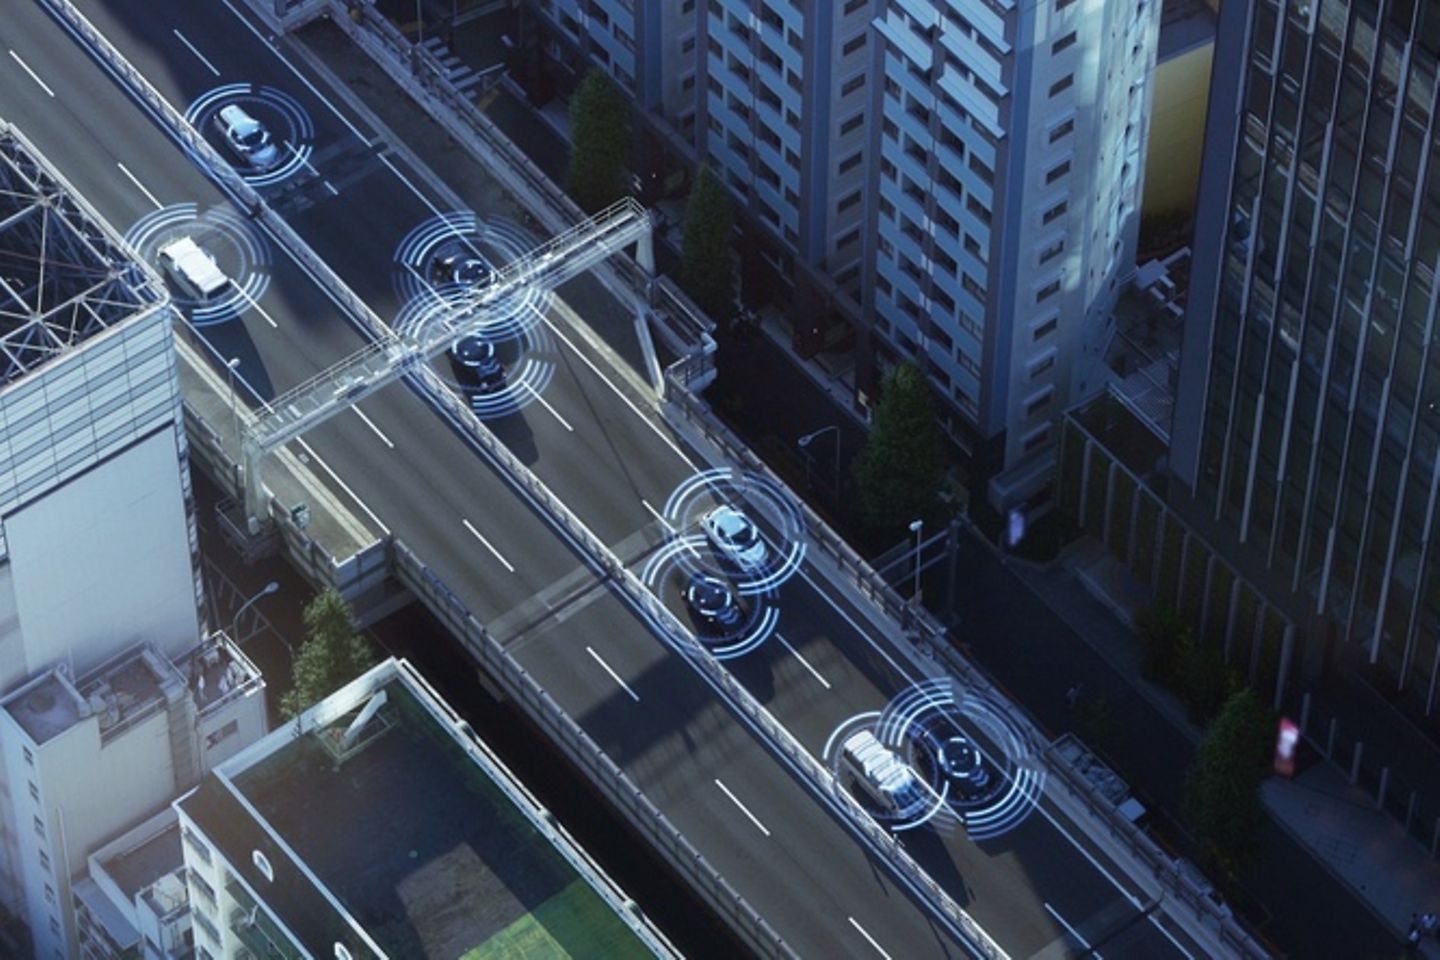 Bird’s-eye view of a road in a city on which cars are traveling, surrounded by network icons.